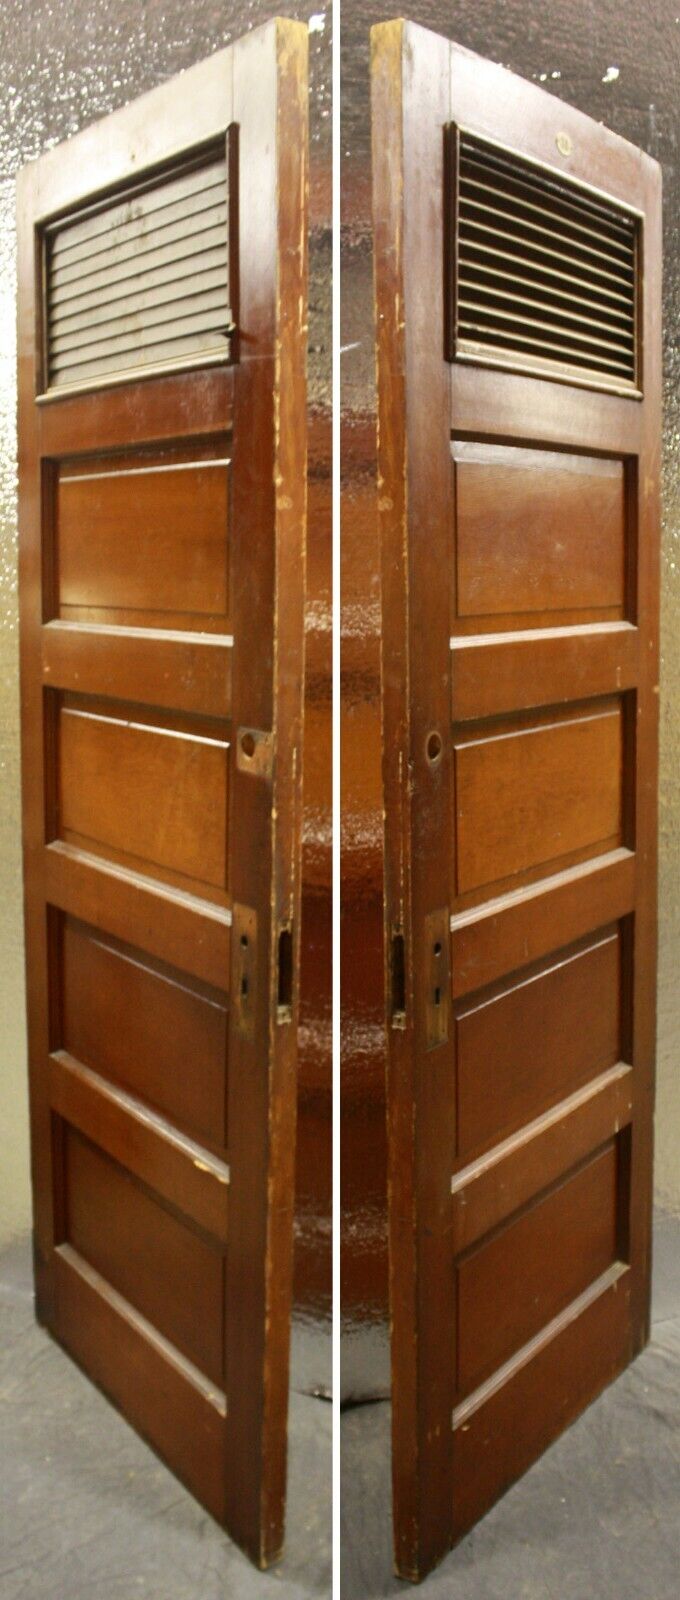 7 available 32"x79"x1.75" Antique Vintage Old Reclaimed Salvaged SOLID Wood Wooden Interior Door Panels